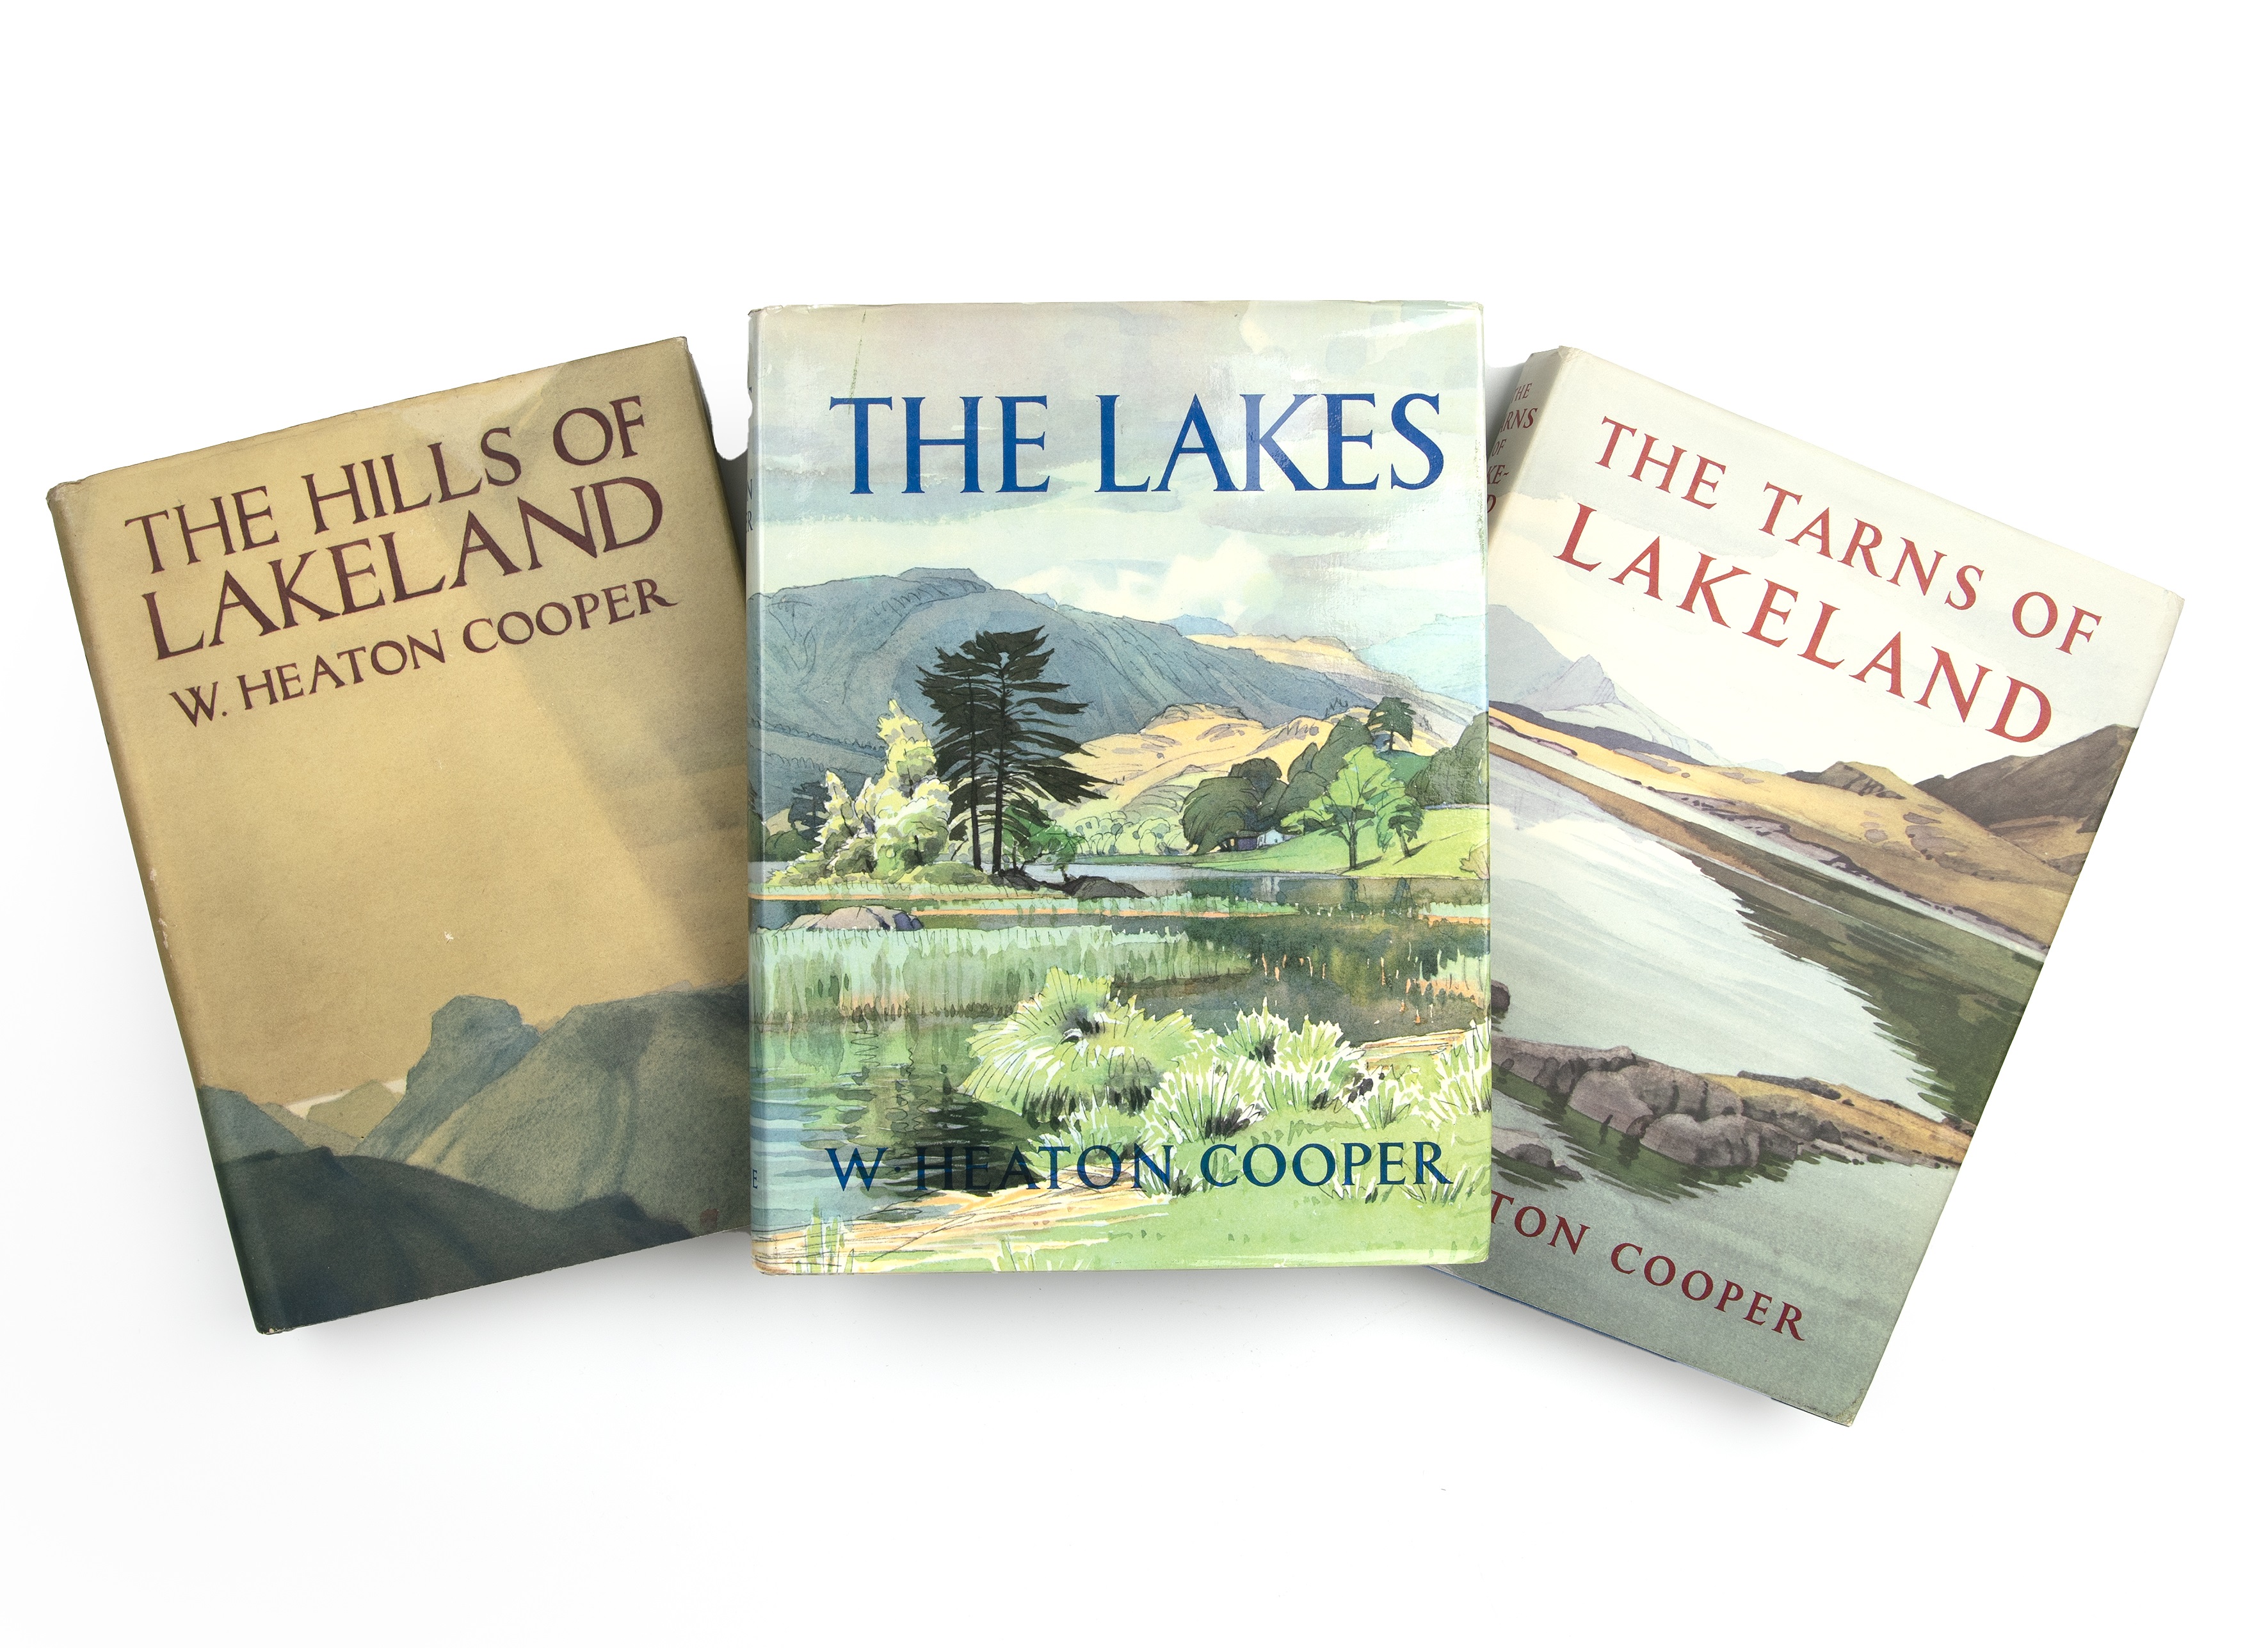 Heaton-Cooper (William) (1903-1995) 'The Tarns of Lakeland'. 2nd Ed. 1970. d/w. signed by the author